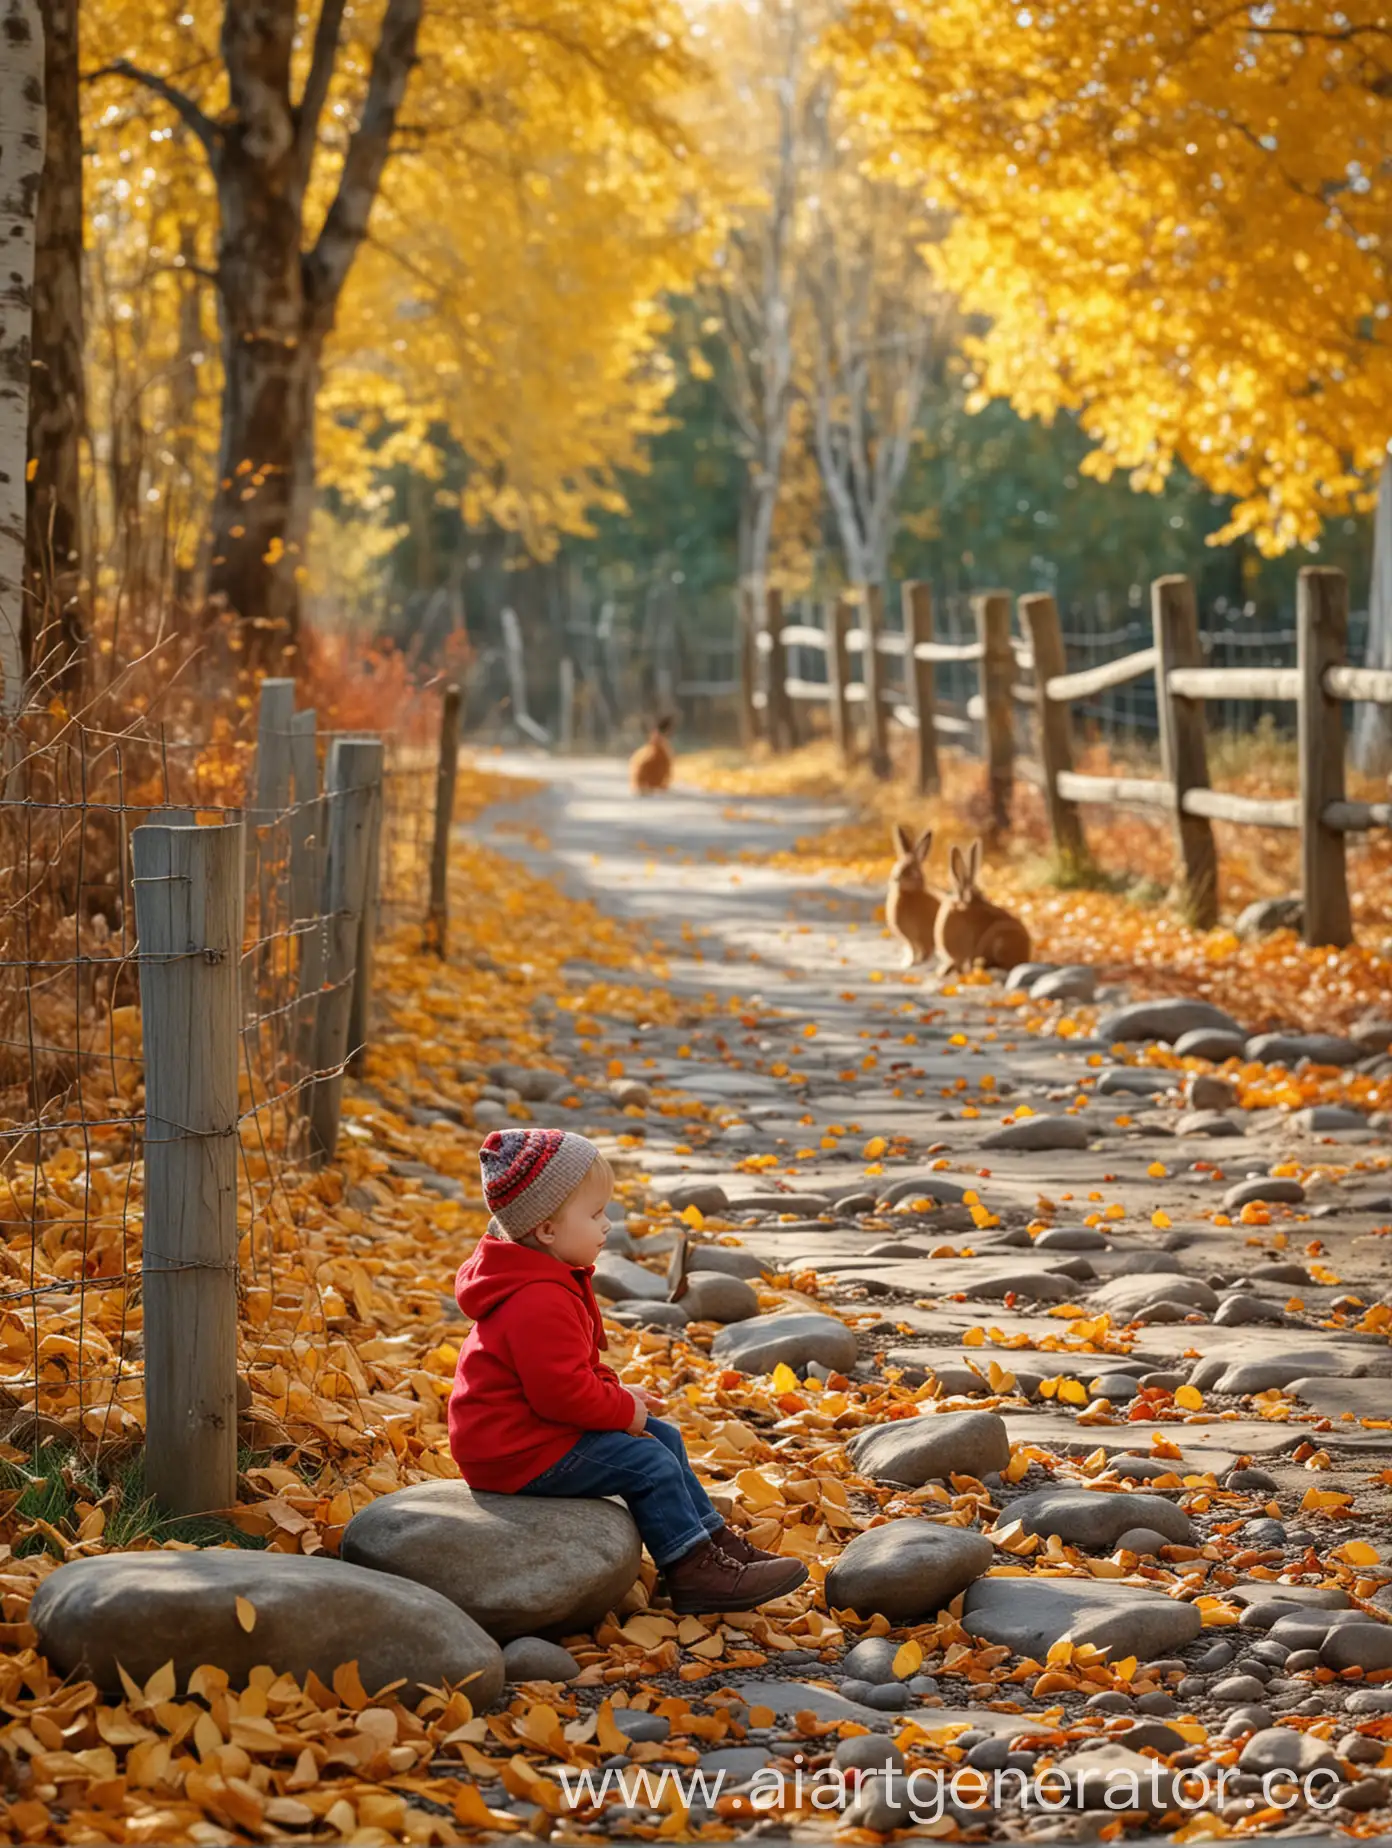 Child-Sitting-by-Stone-Fence-Surrounded-by-Autumn-Leaves-and-Red-Hares